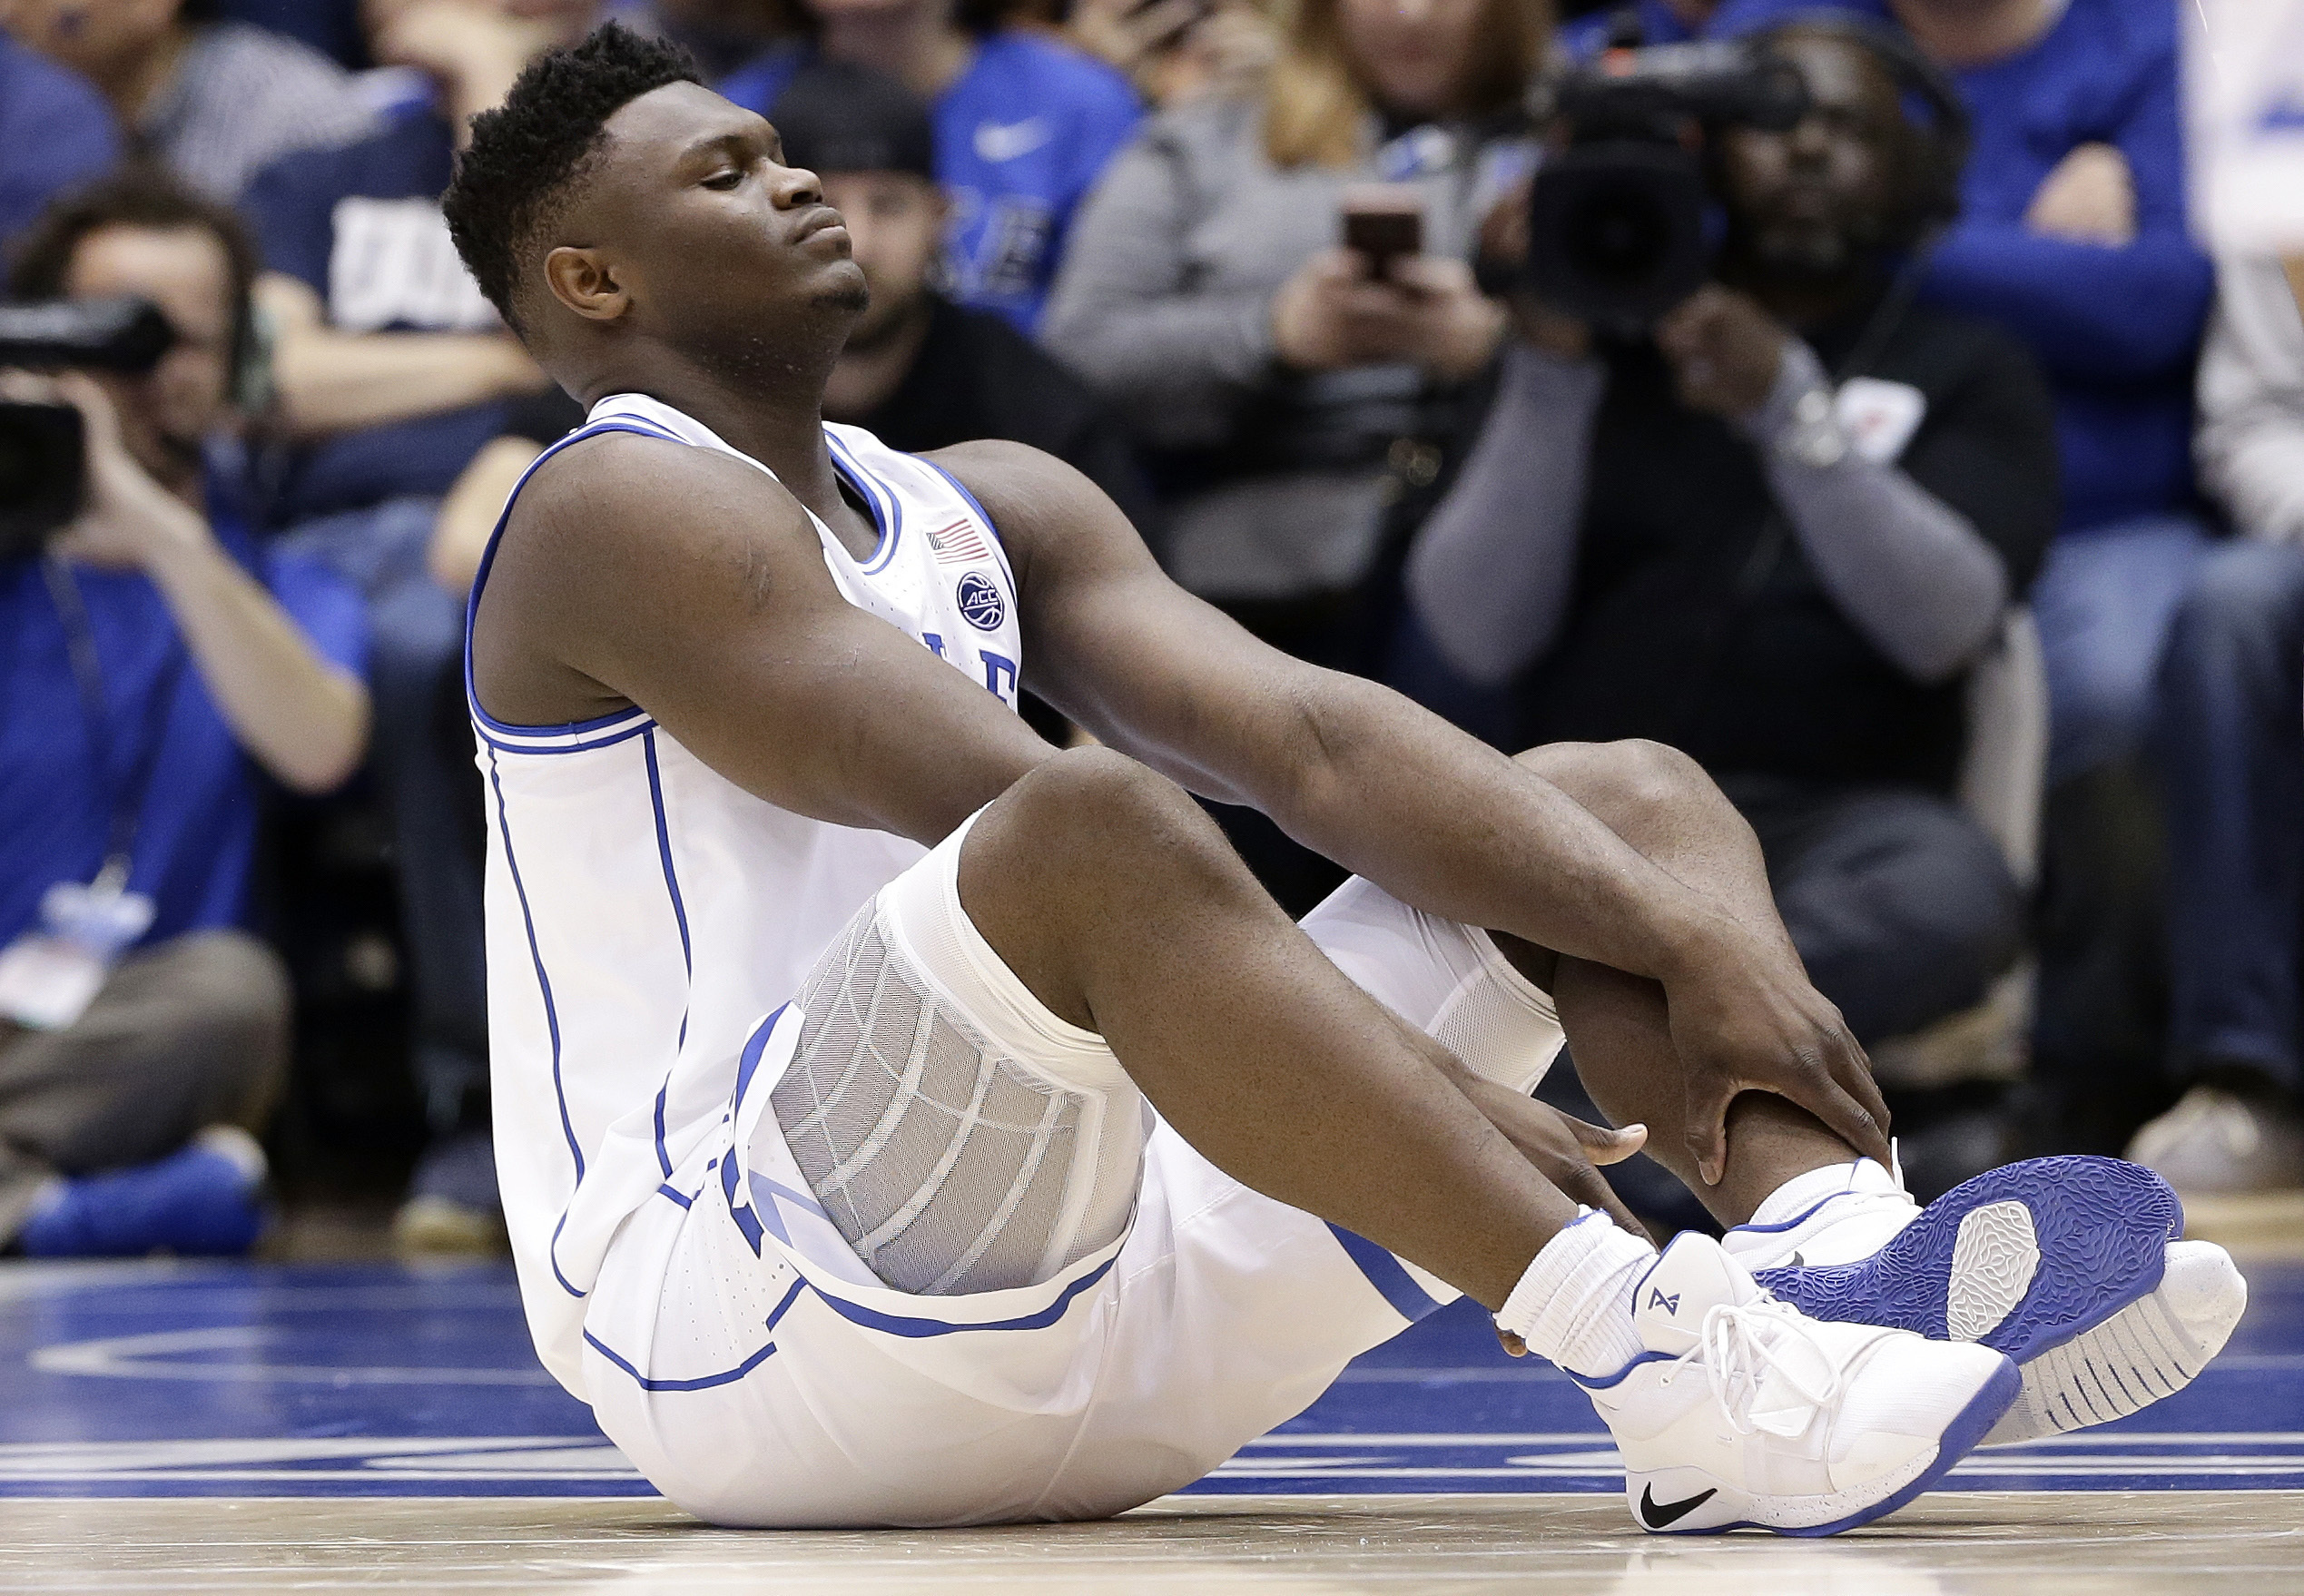 College Basketball Star's Busted Shoe 